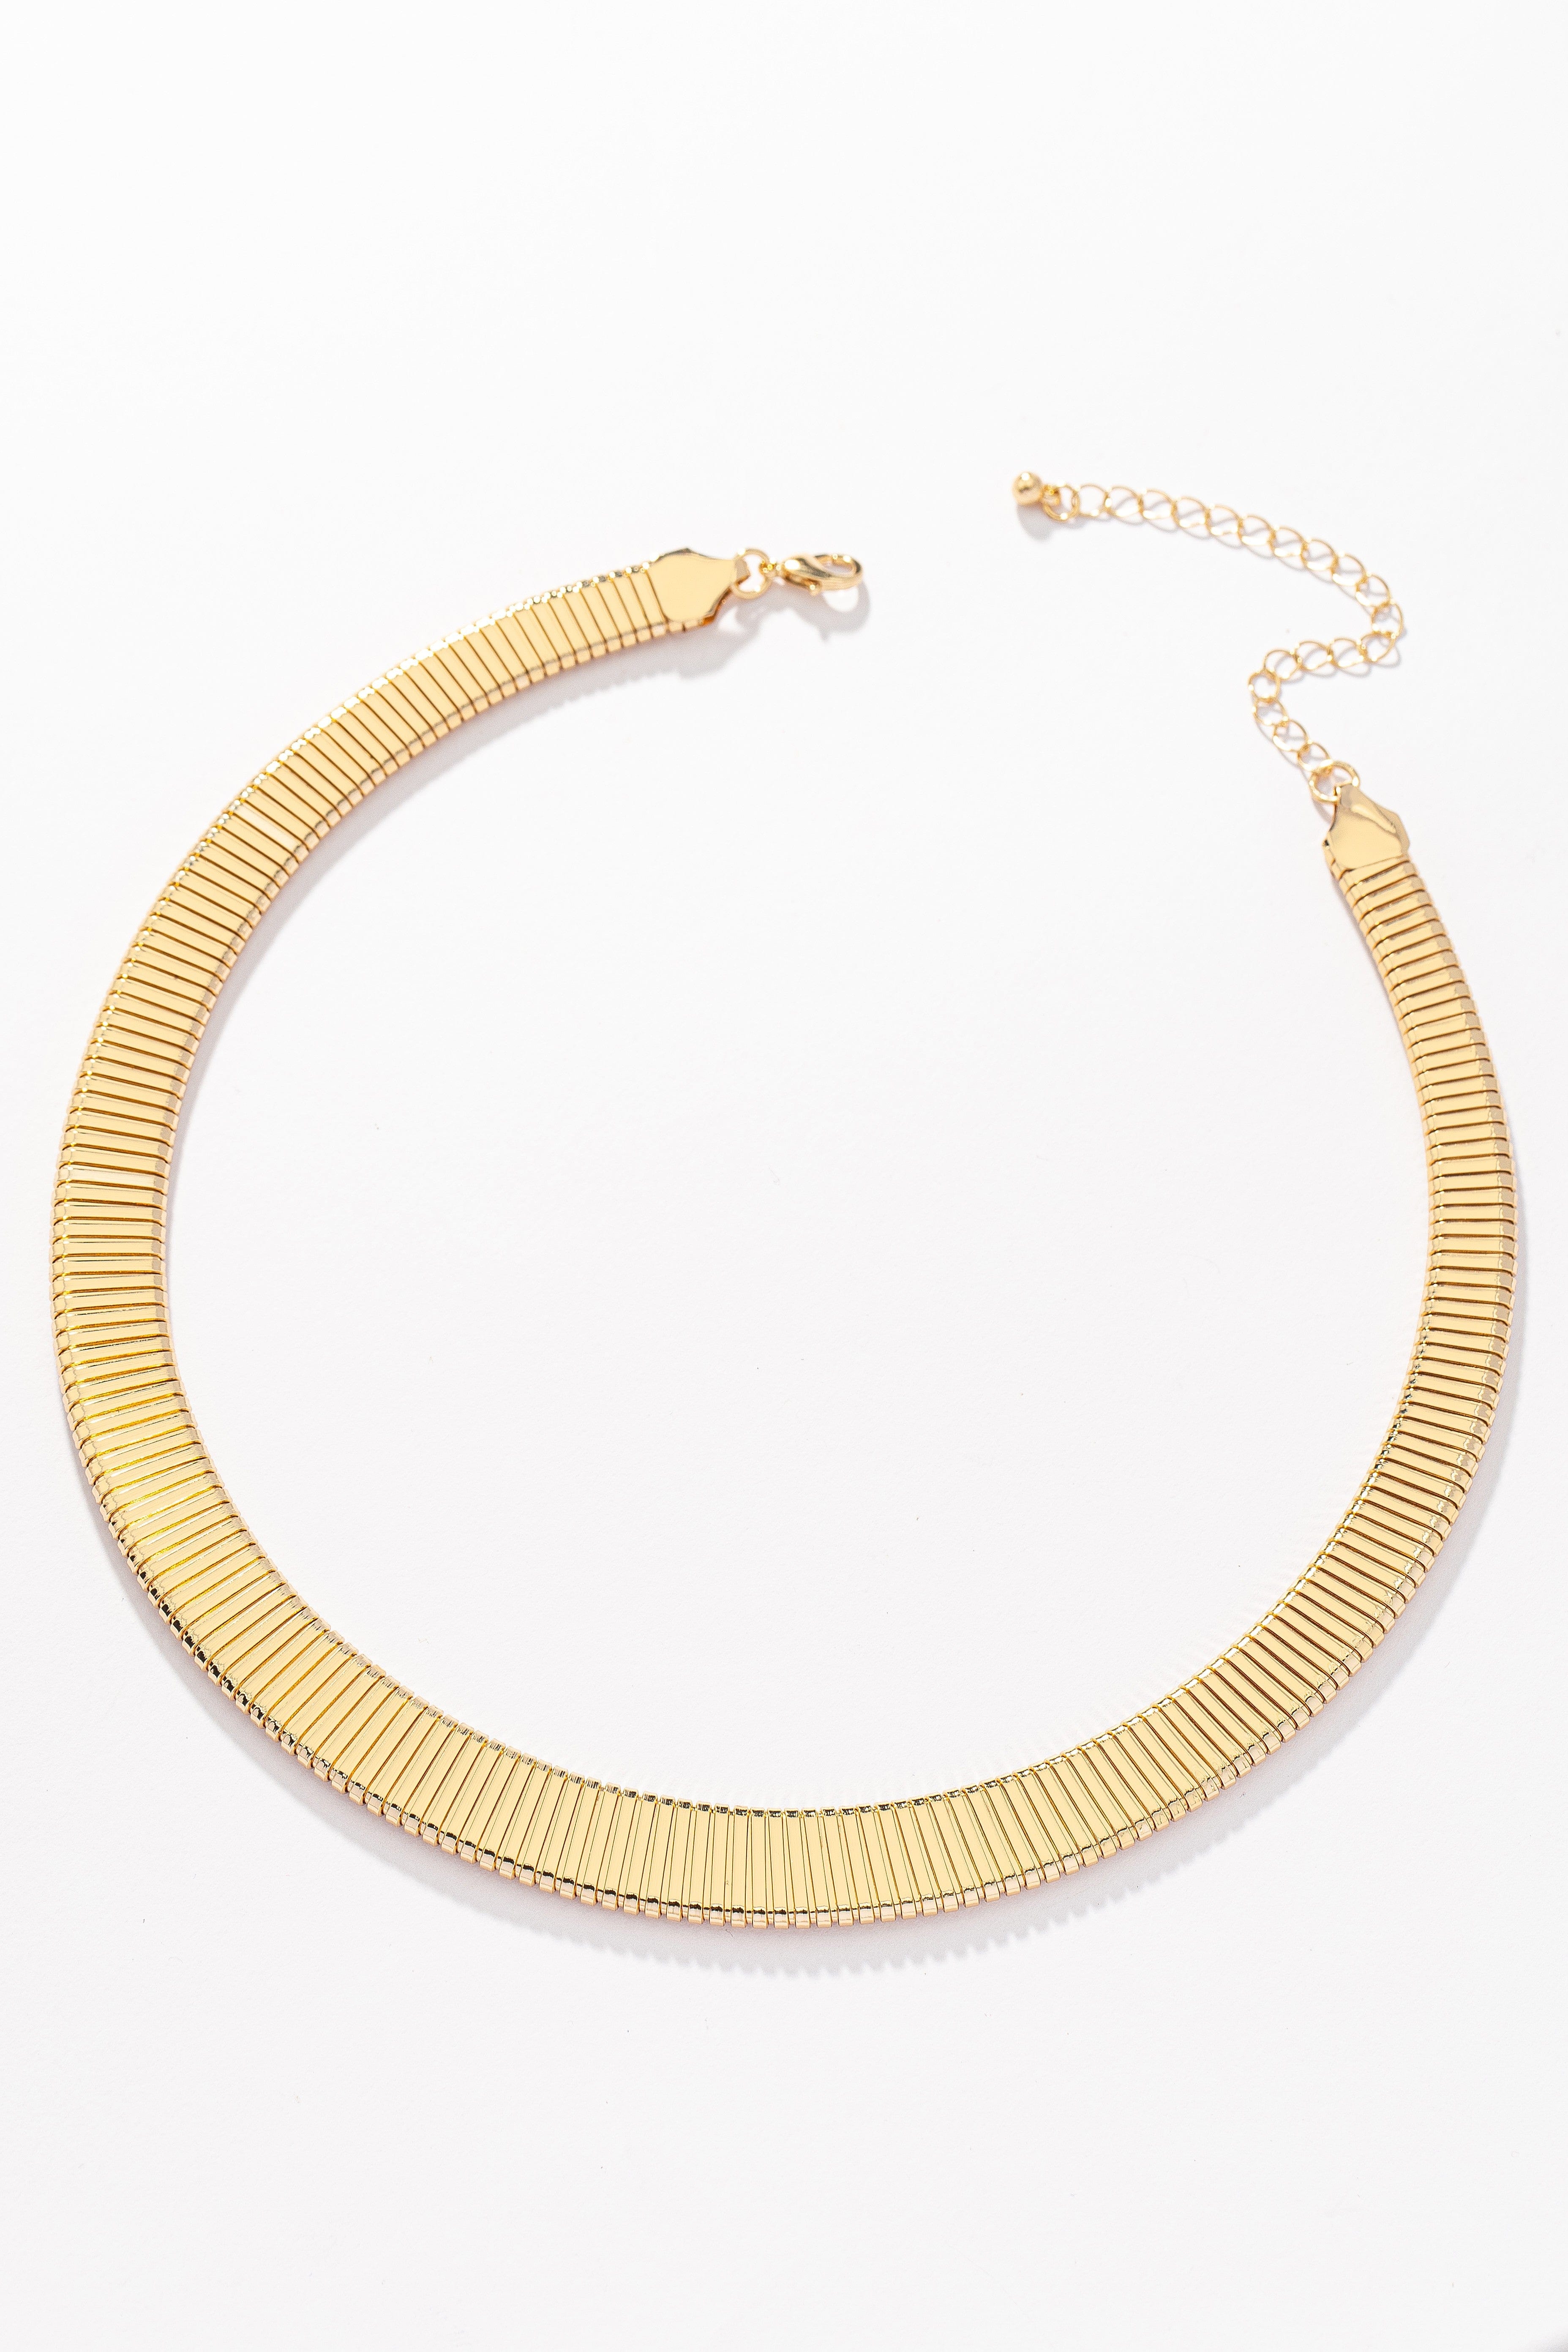 LA3accessories Jewelry - Necklaces Flat Wide Snake Chain Tapered Choker Necklace In Gold 79326966